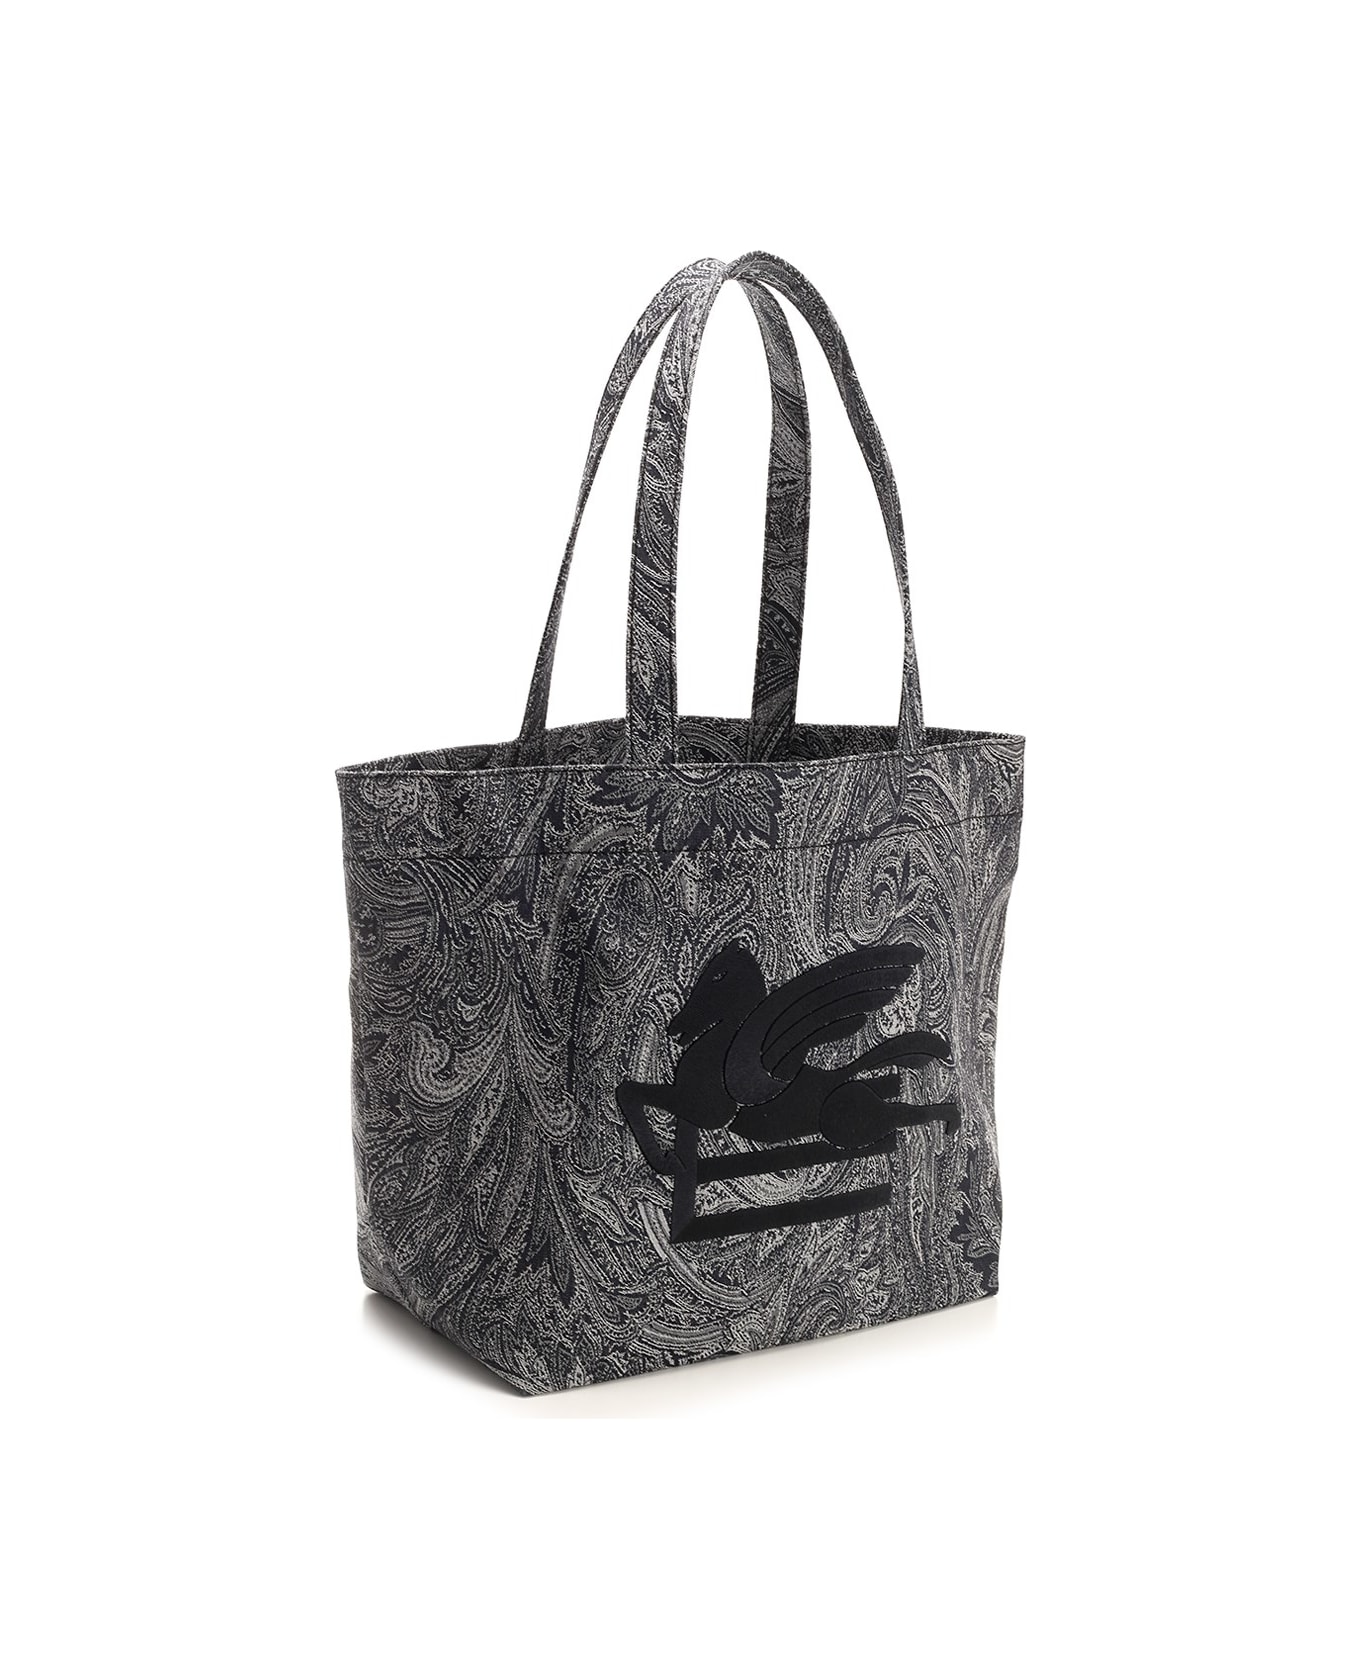 Etro Navy Blue Large Tote Bag With Paisley Jacquard Motif - Blue トートバッグ